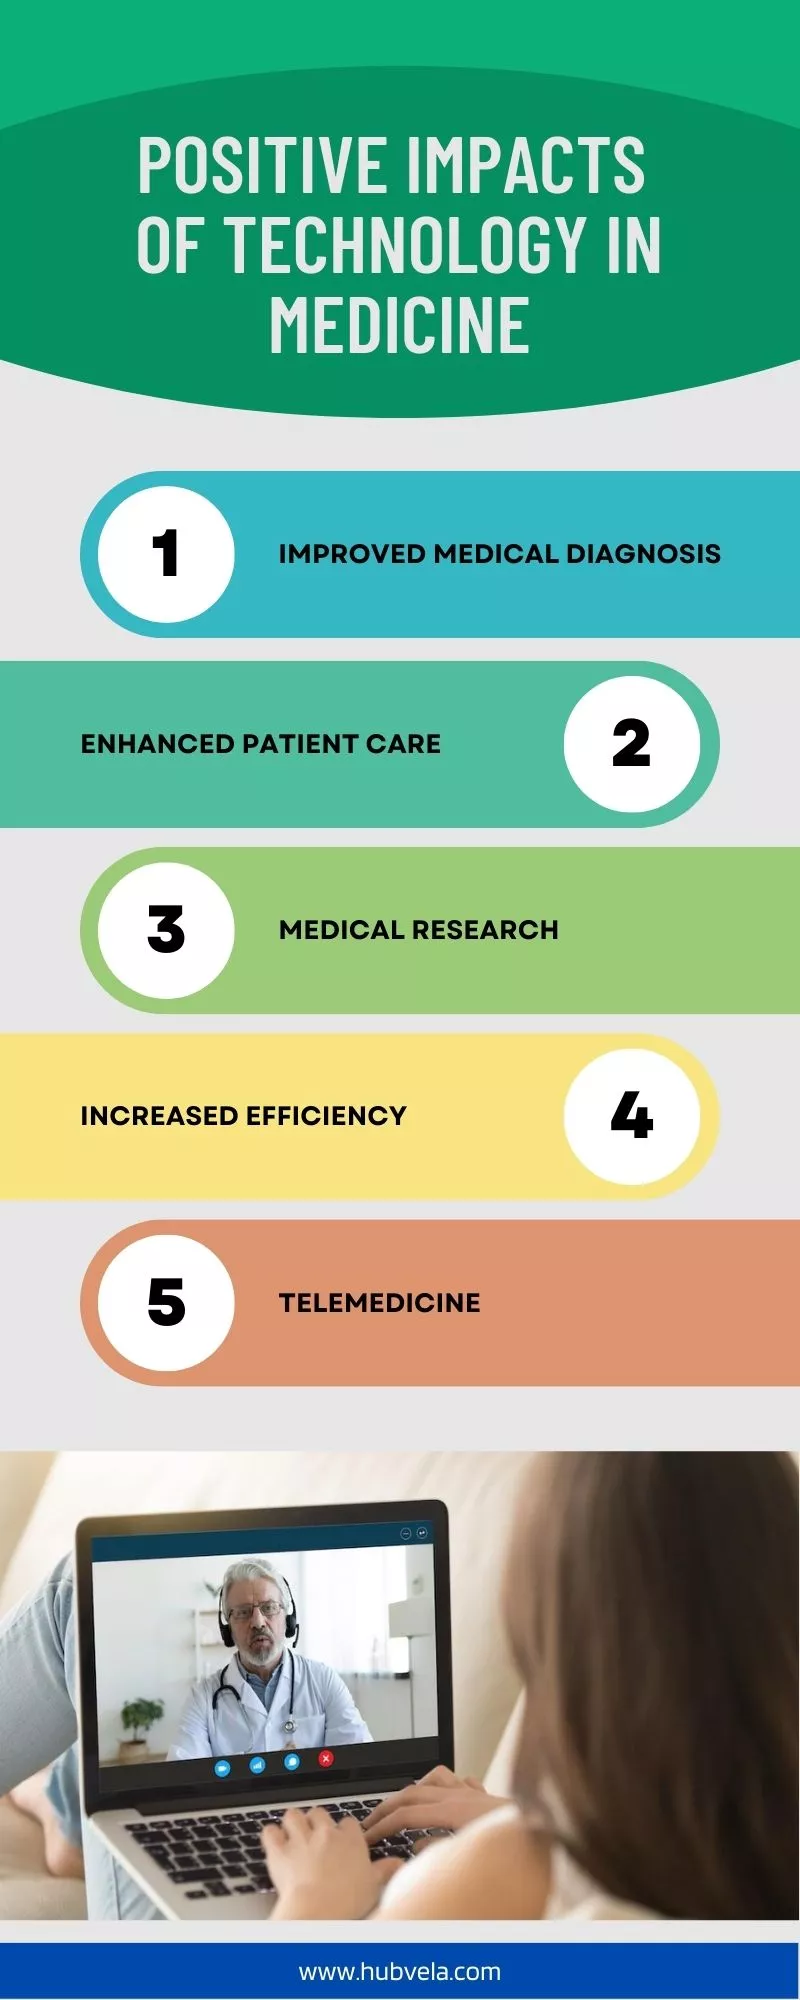 Positive Impacts of Technology on Medicine infographic